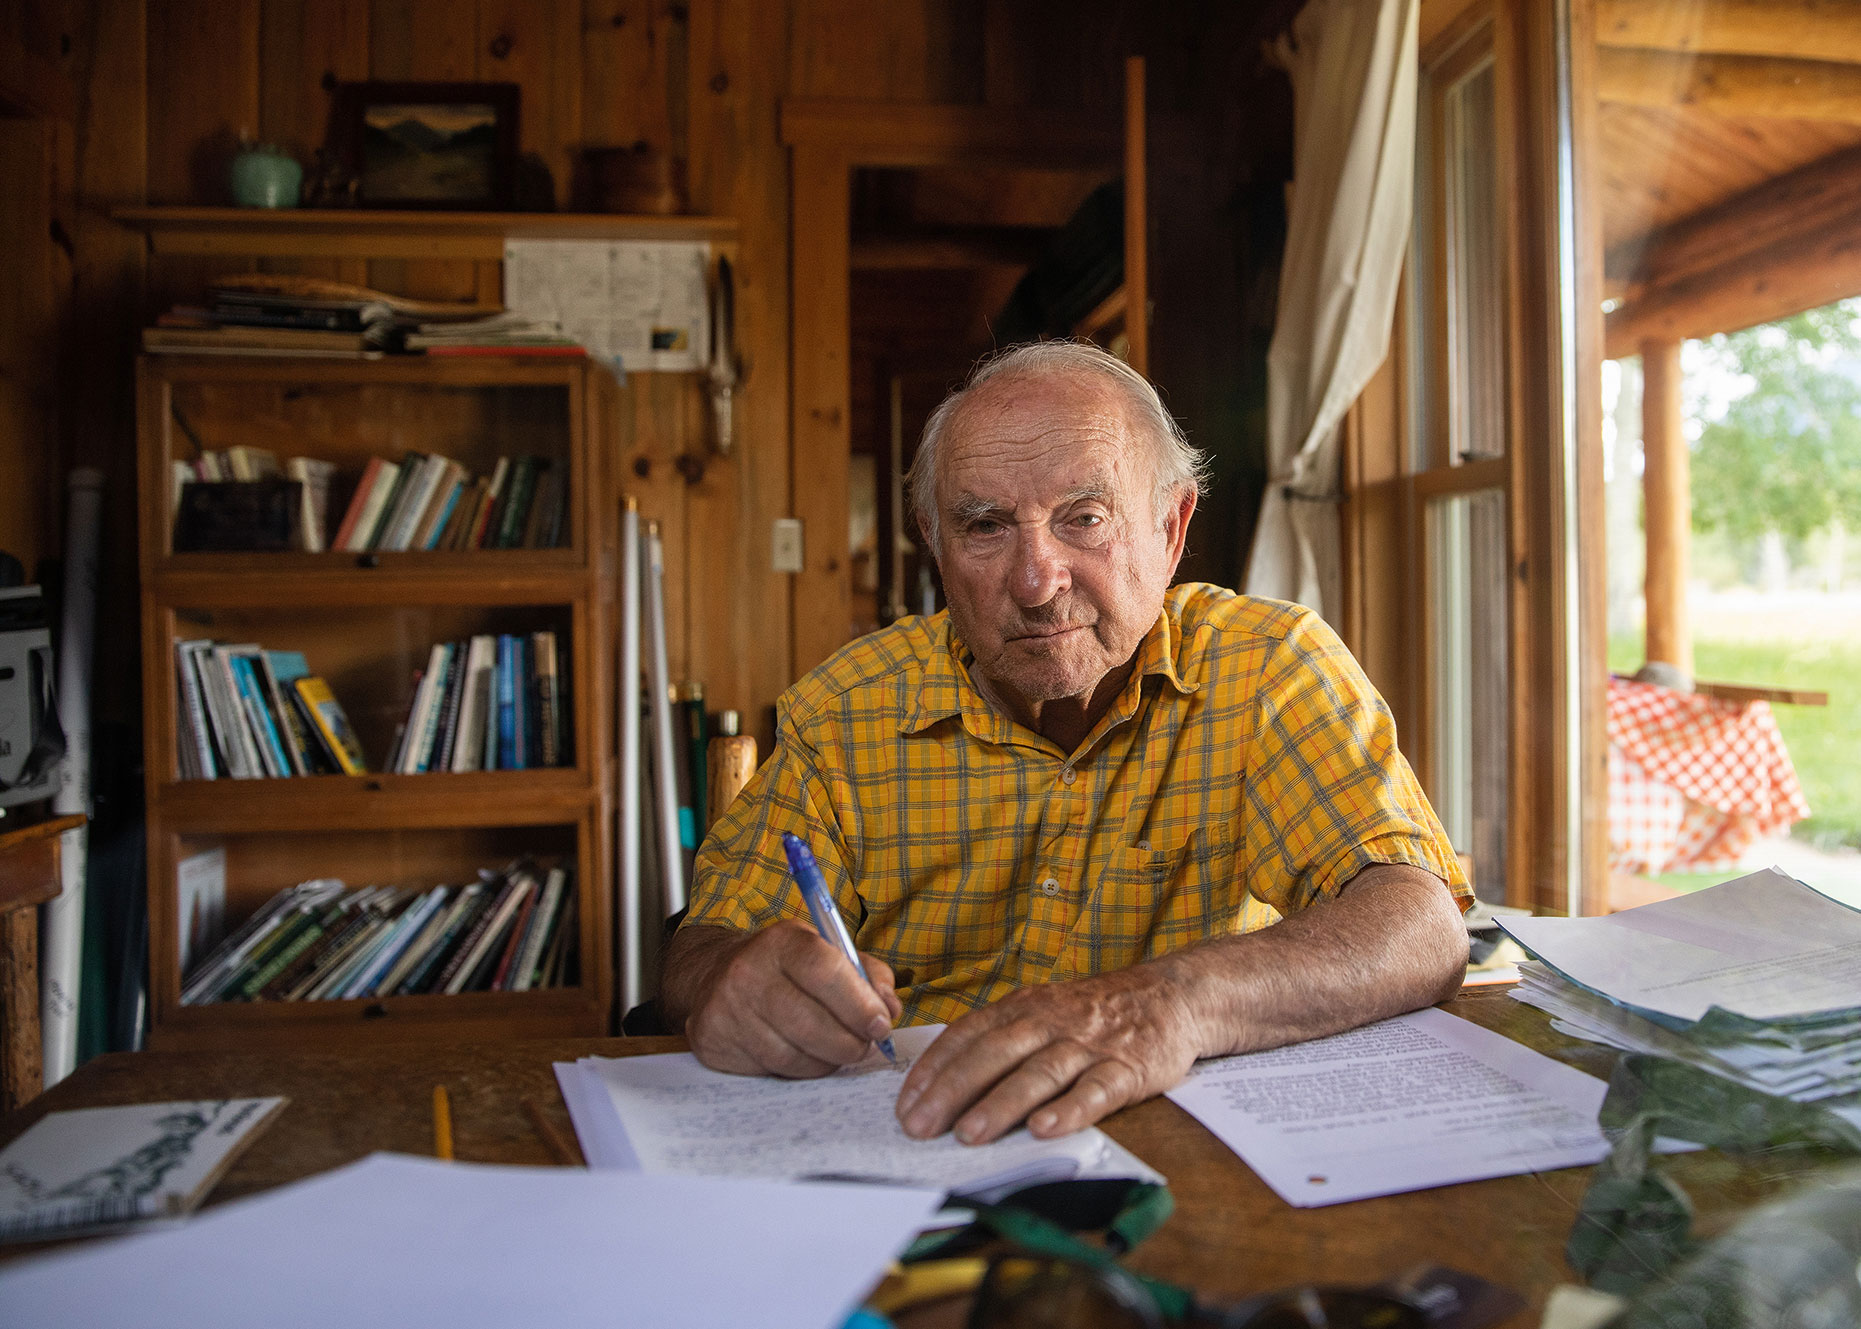 Yvon Chouinard at home. Photo: Campbell Brewer